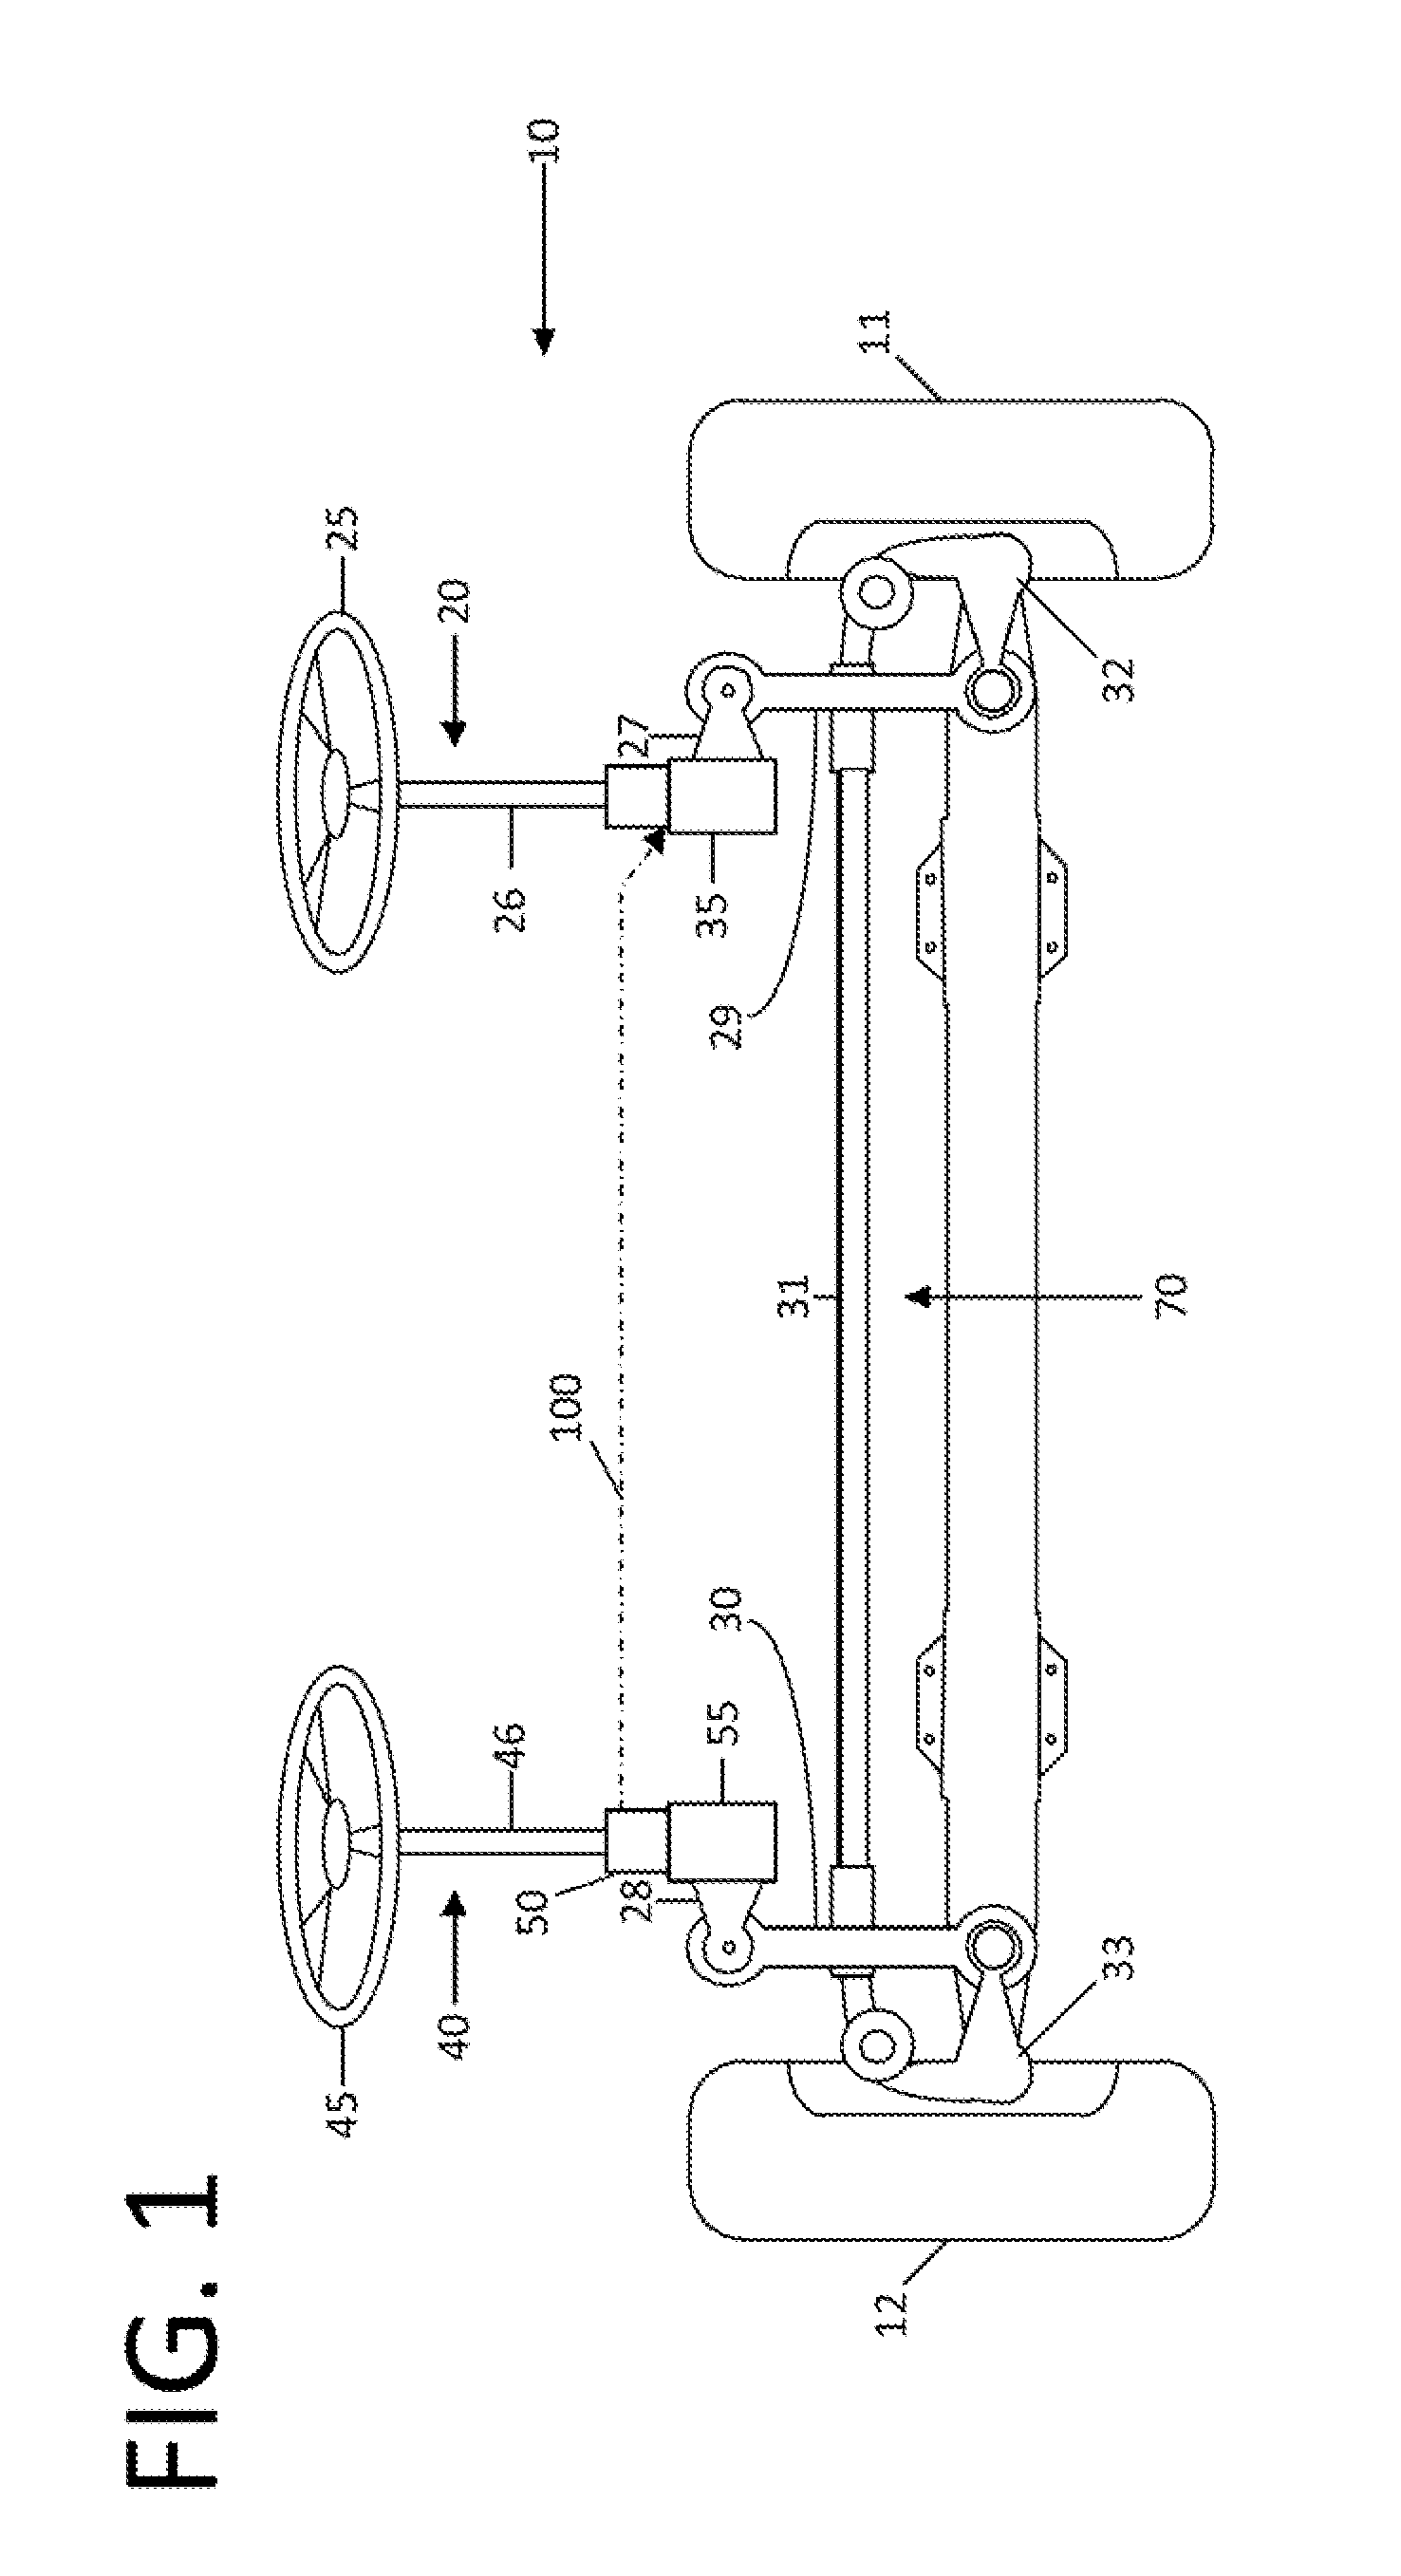 Dual steering system for a vehicle